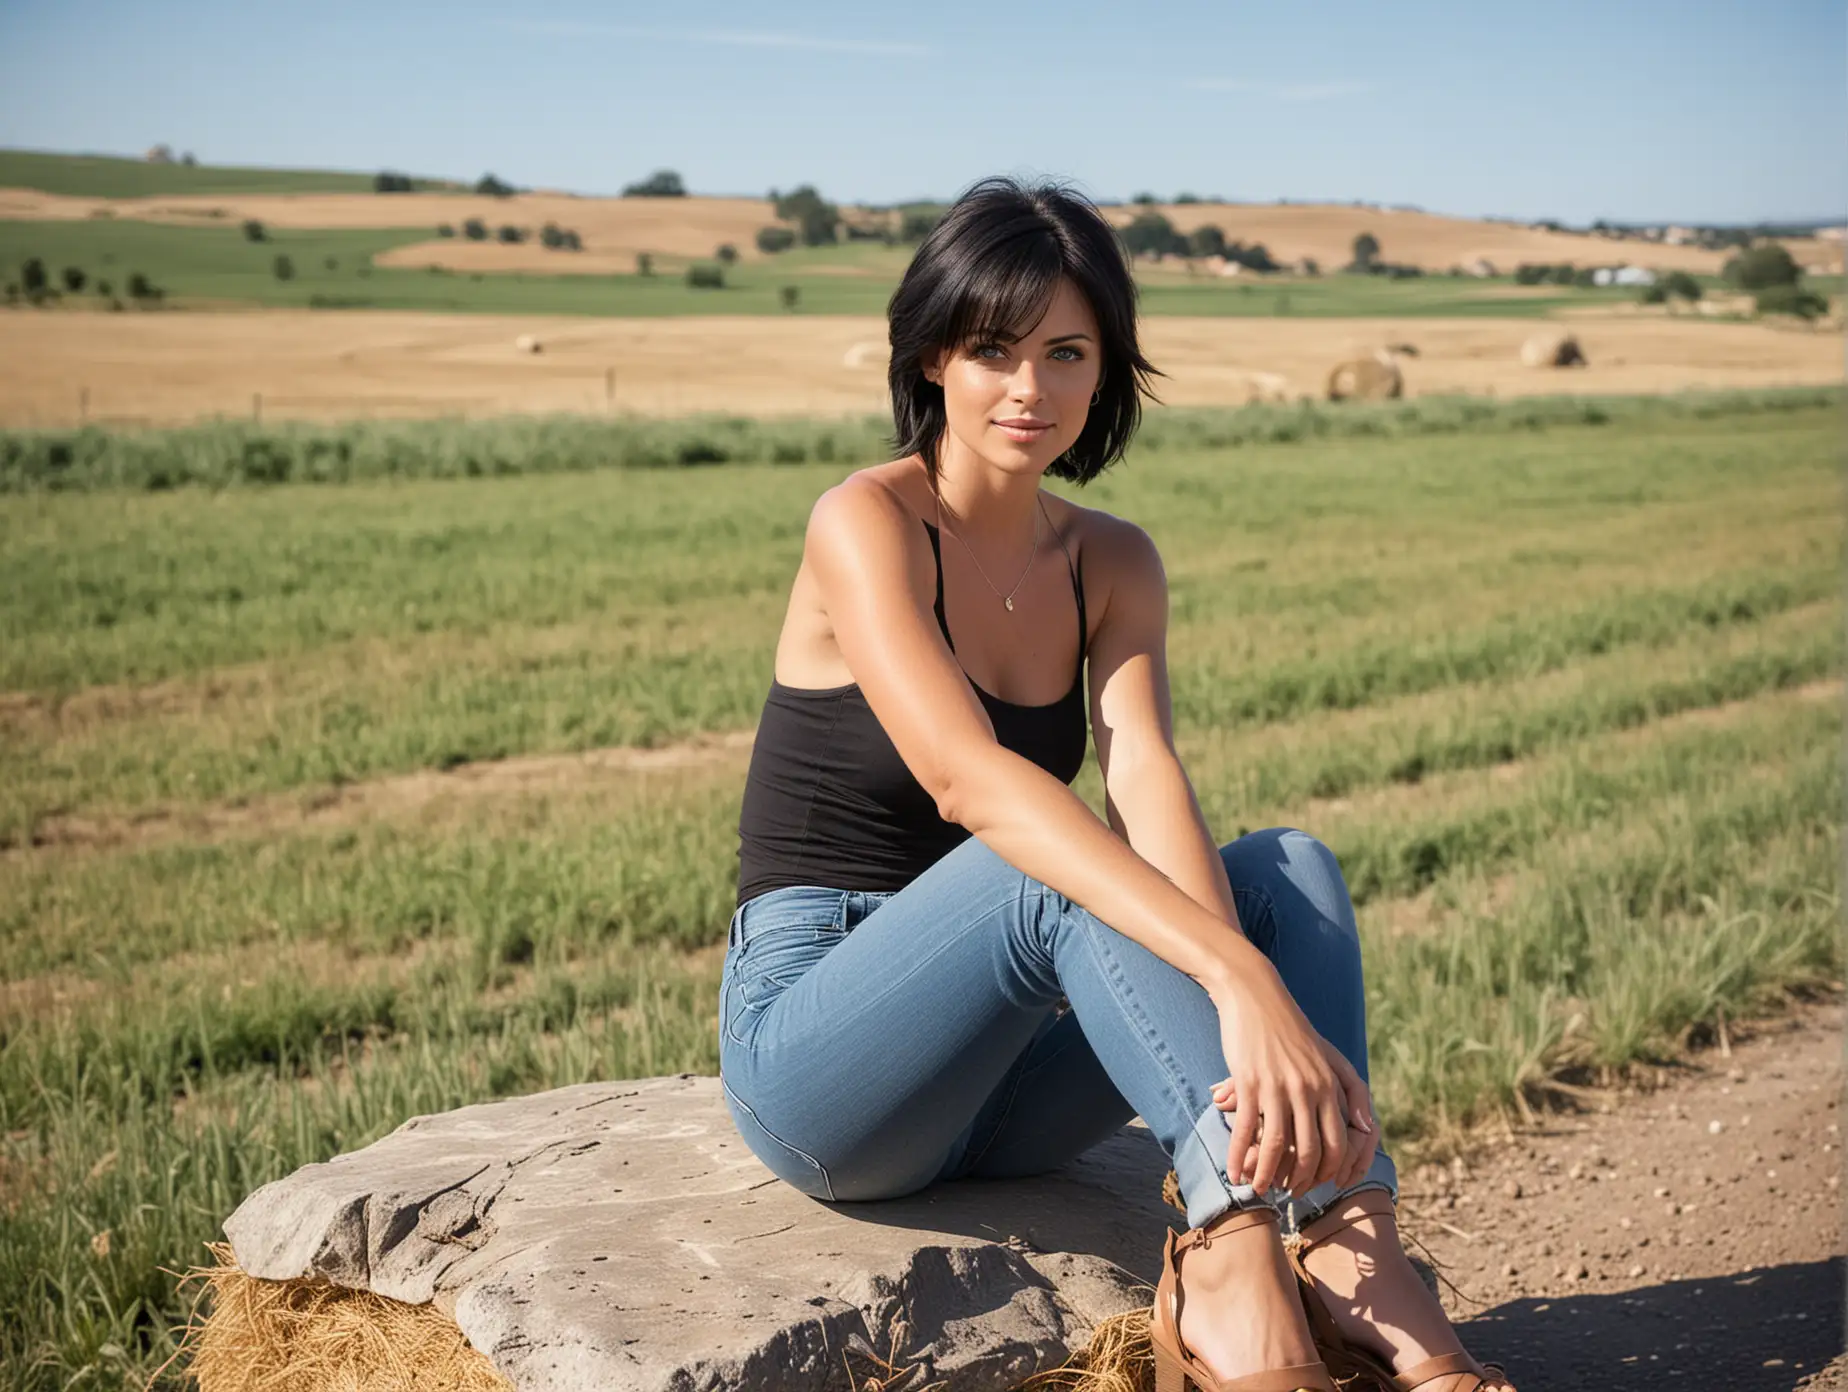 29 year old woman,short black hair ,blue eyes,jeans,halter top,sitting on rock,near country road ,full figure,low heeled shoes,road in background,hay field in background